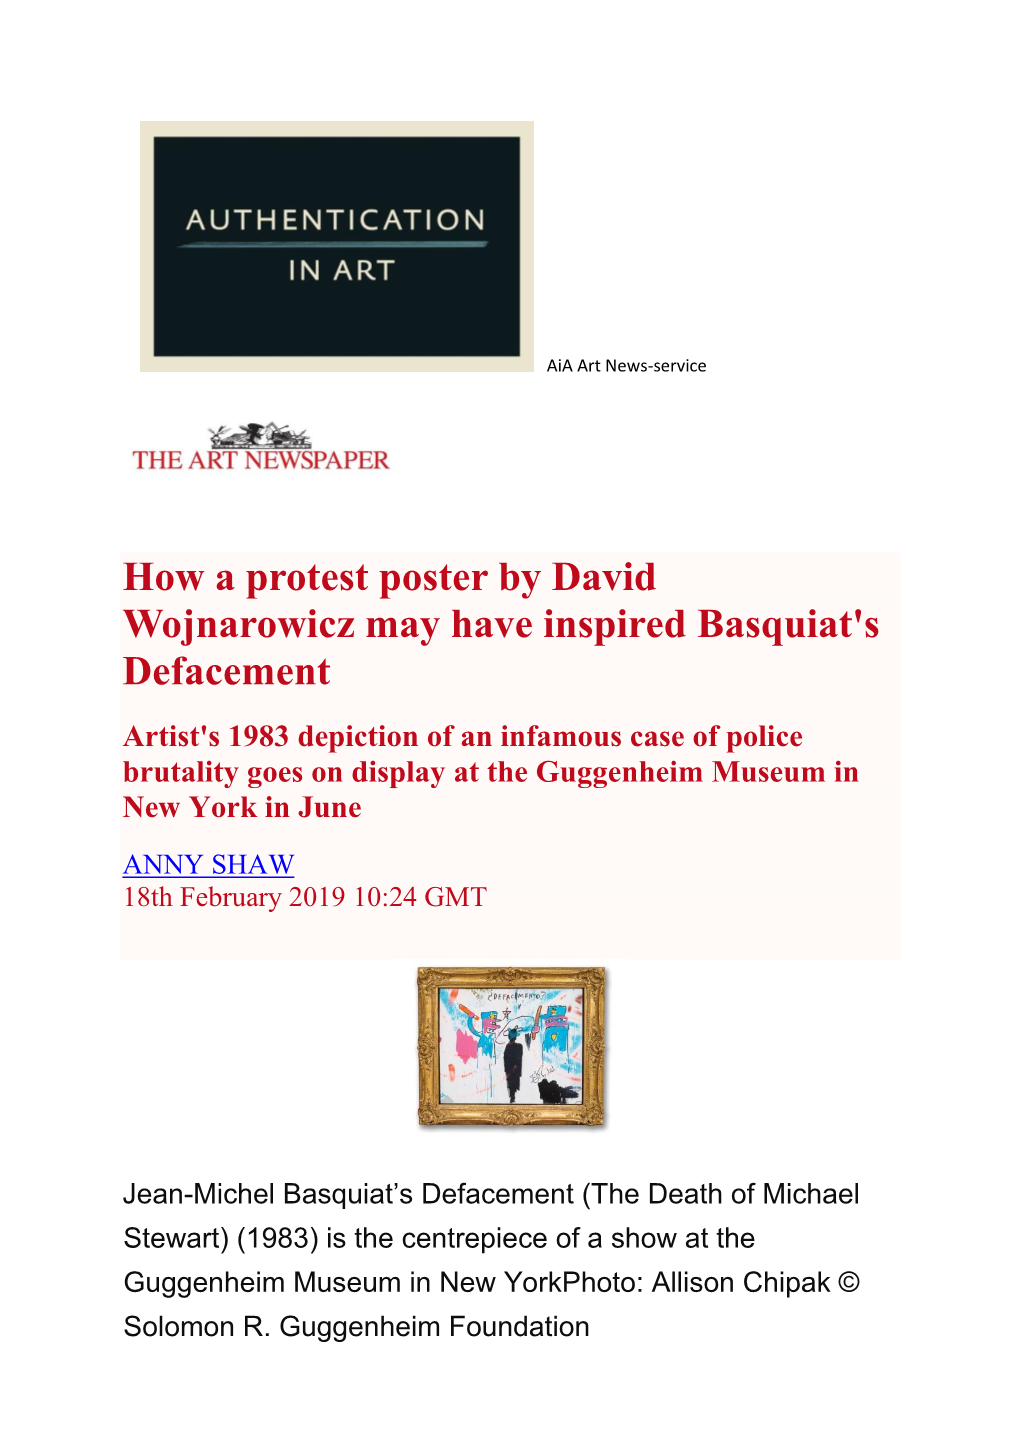 How a Protest Poster by David Wojnarowicz May Have Inspired Basquiat's Defacement